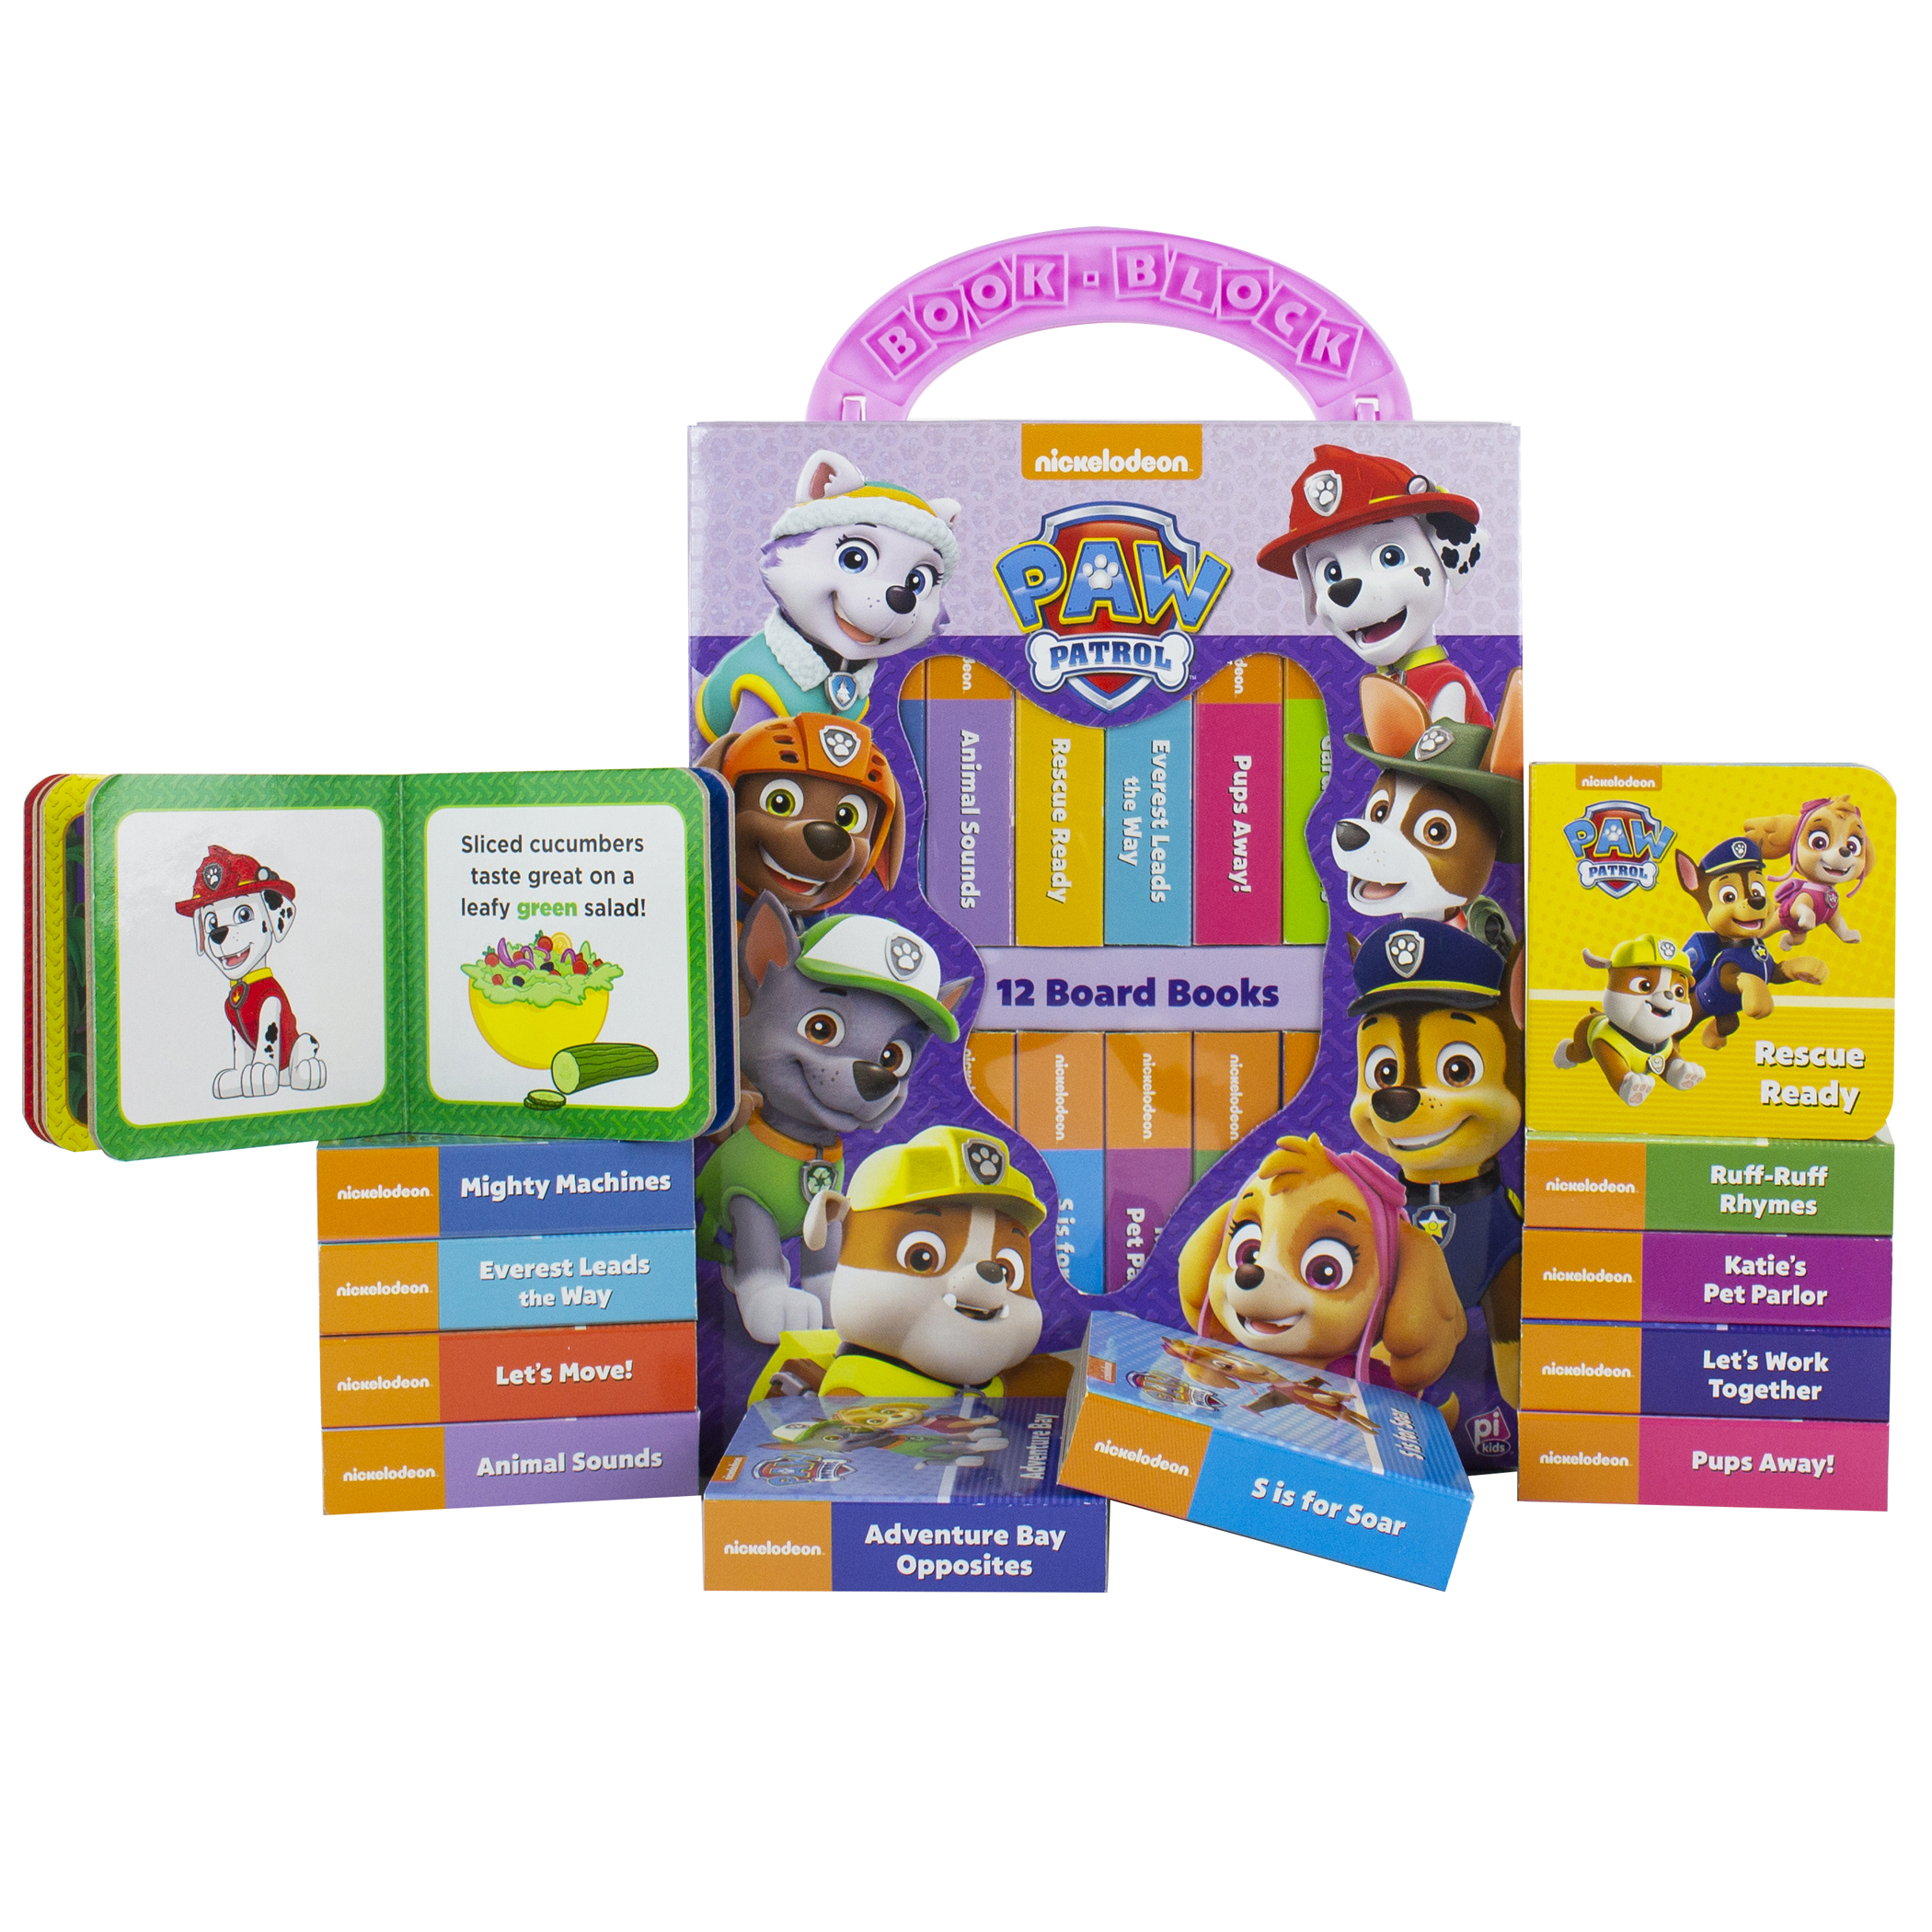 PI Kids My First Library PAW Patrol Girl, 12 Books